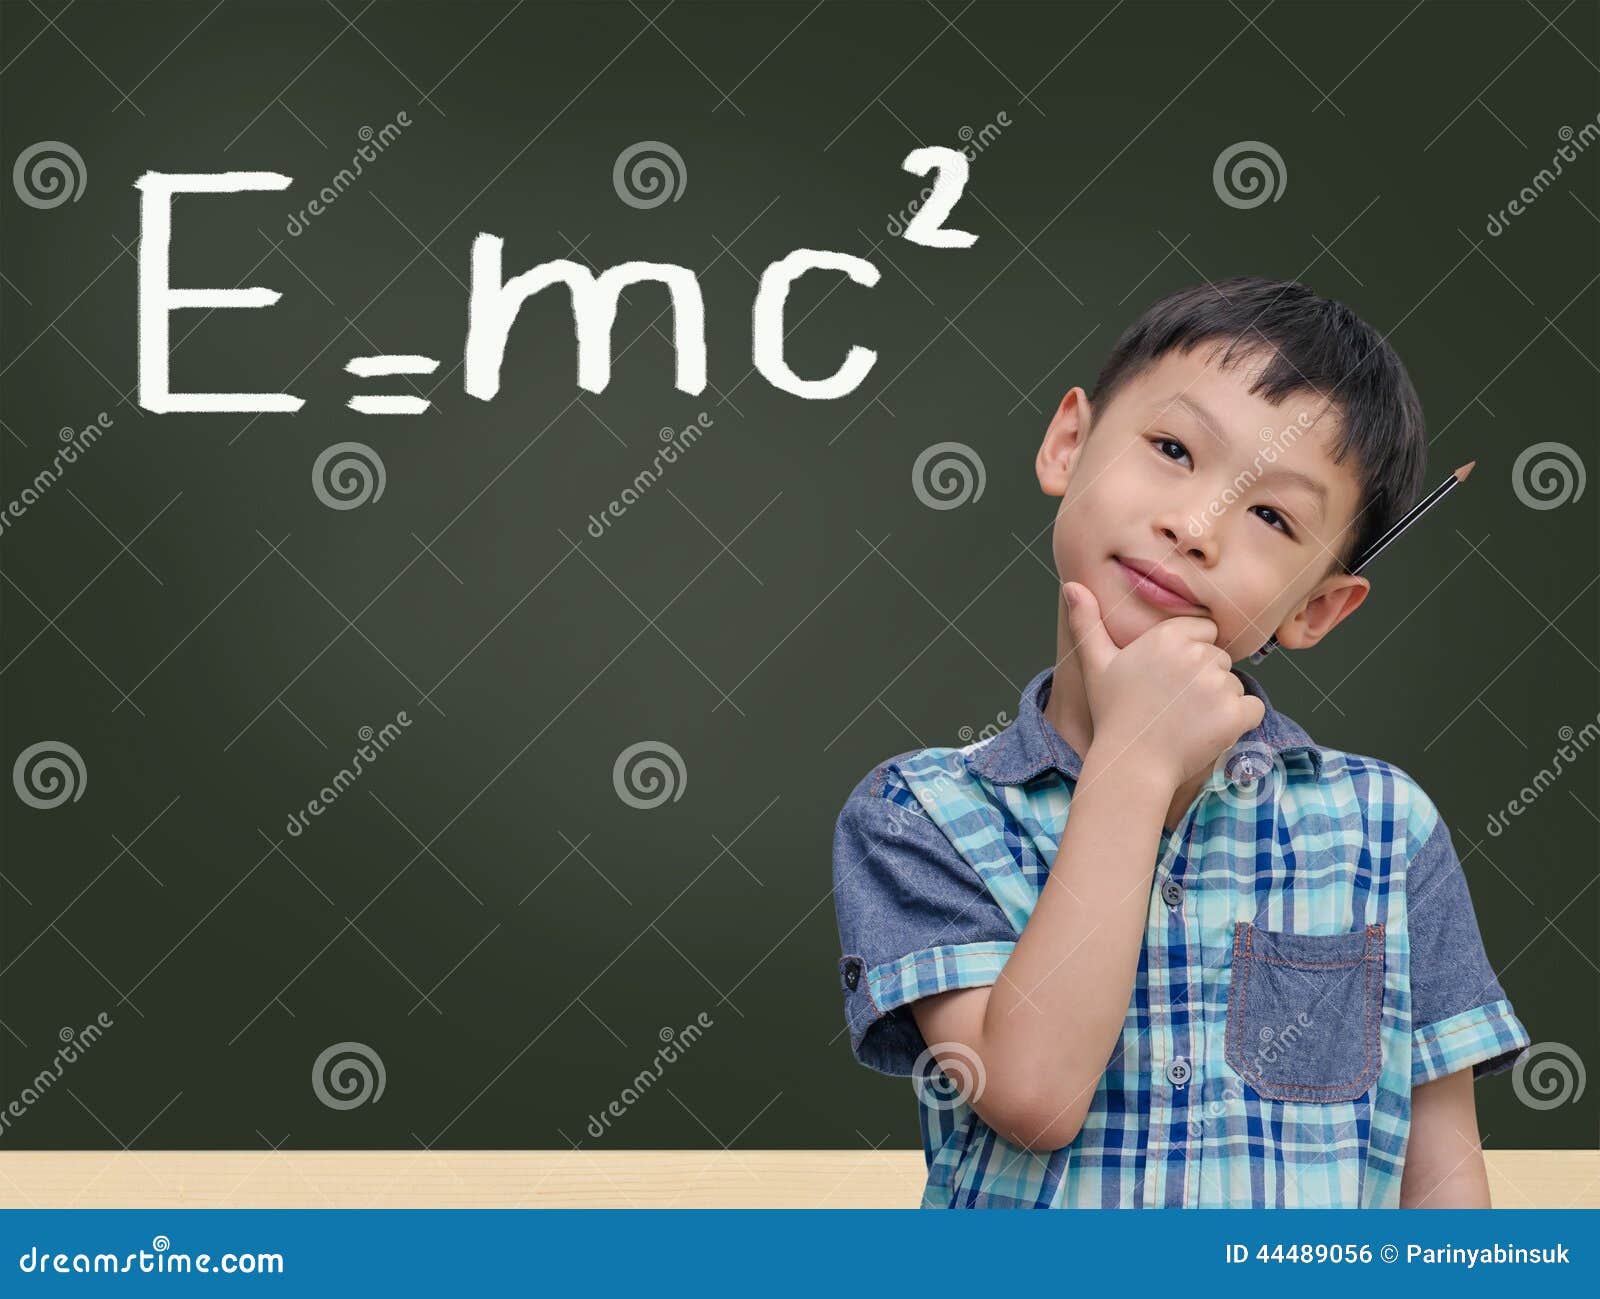 student by chalkboard with e=mc2